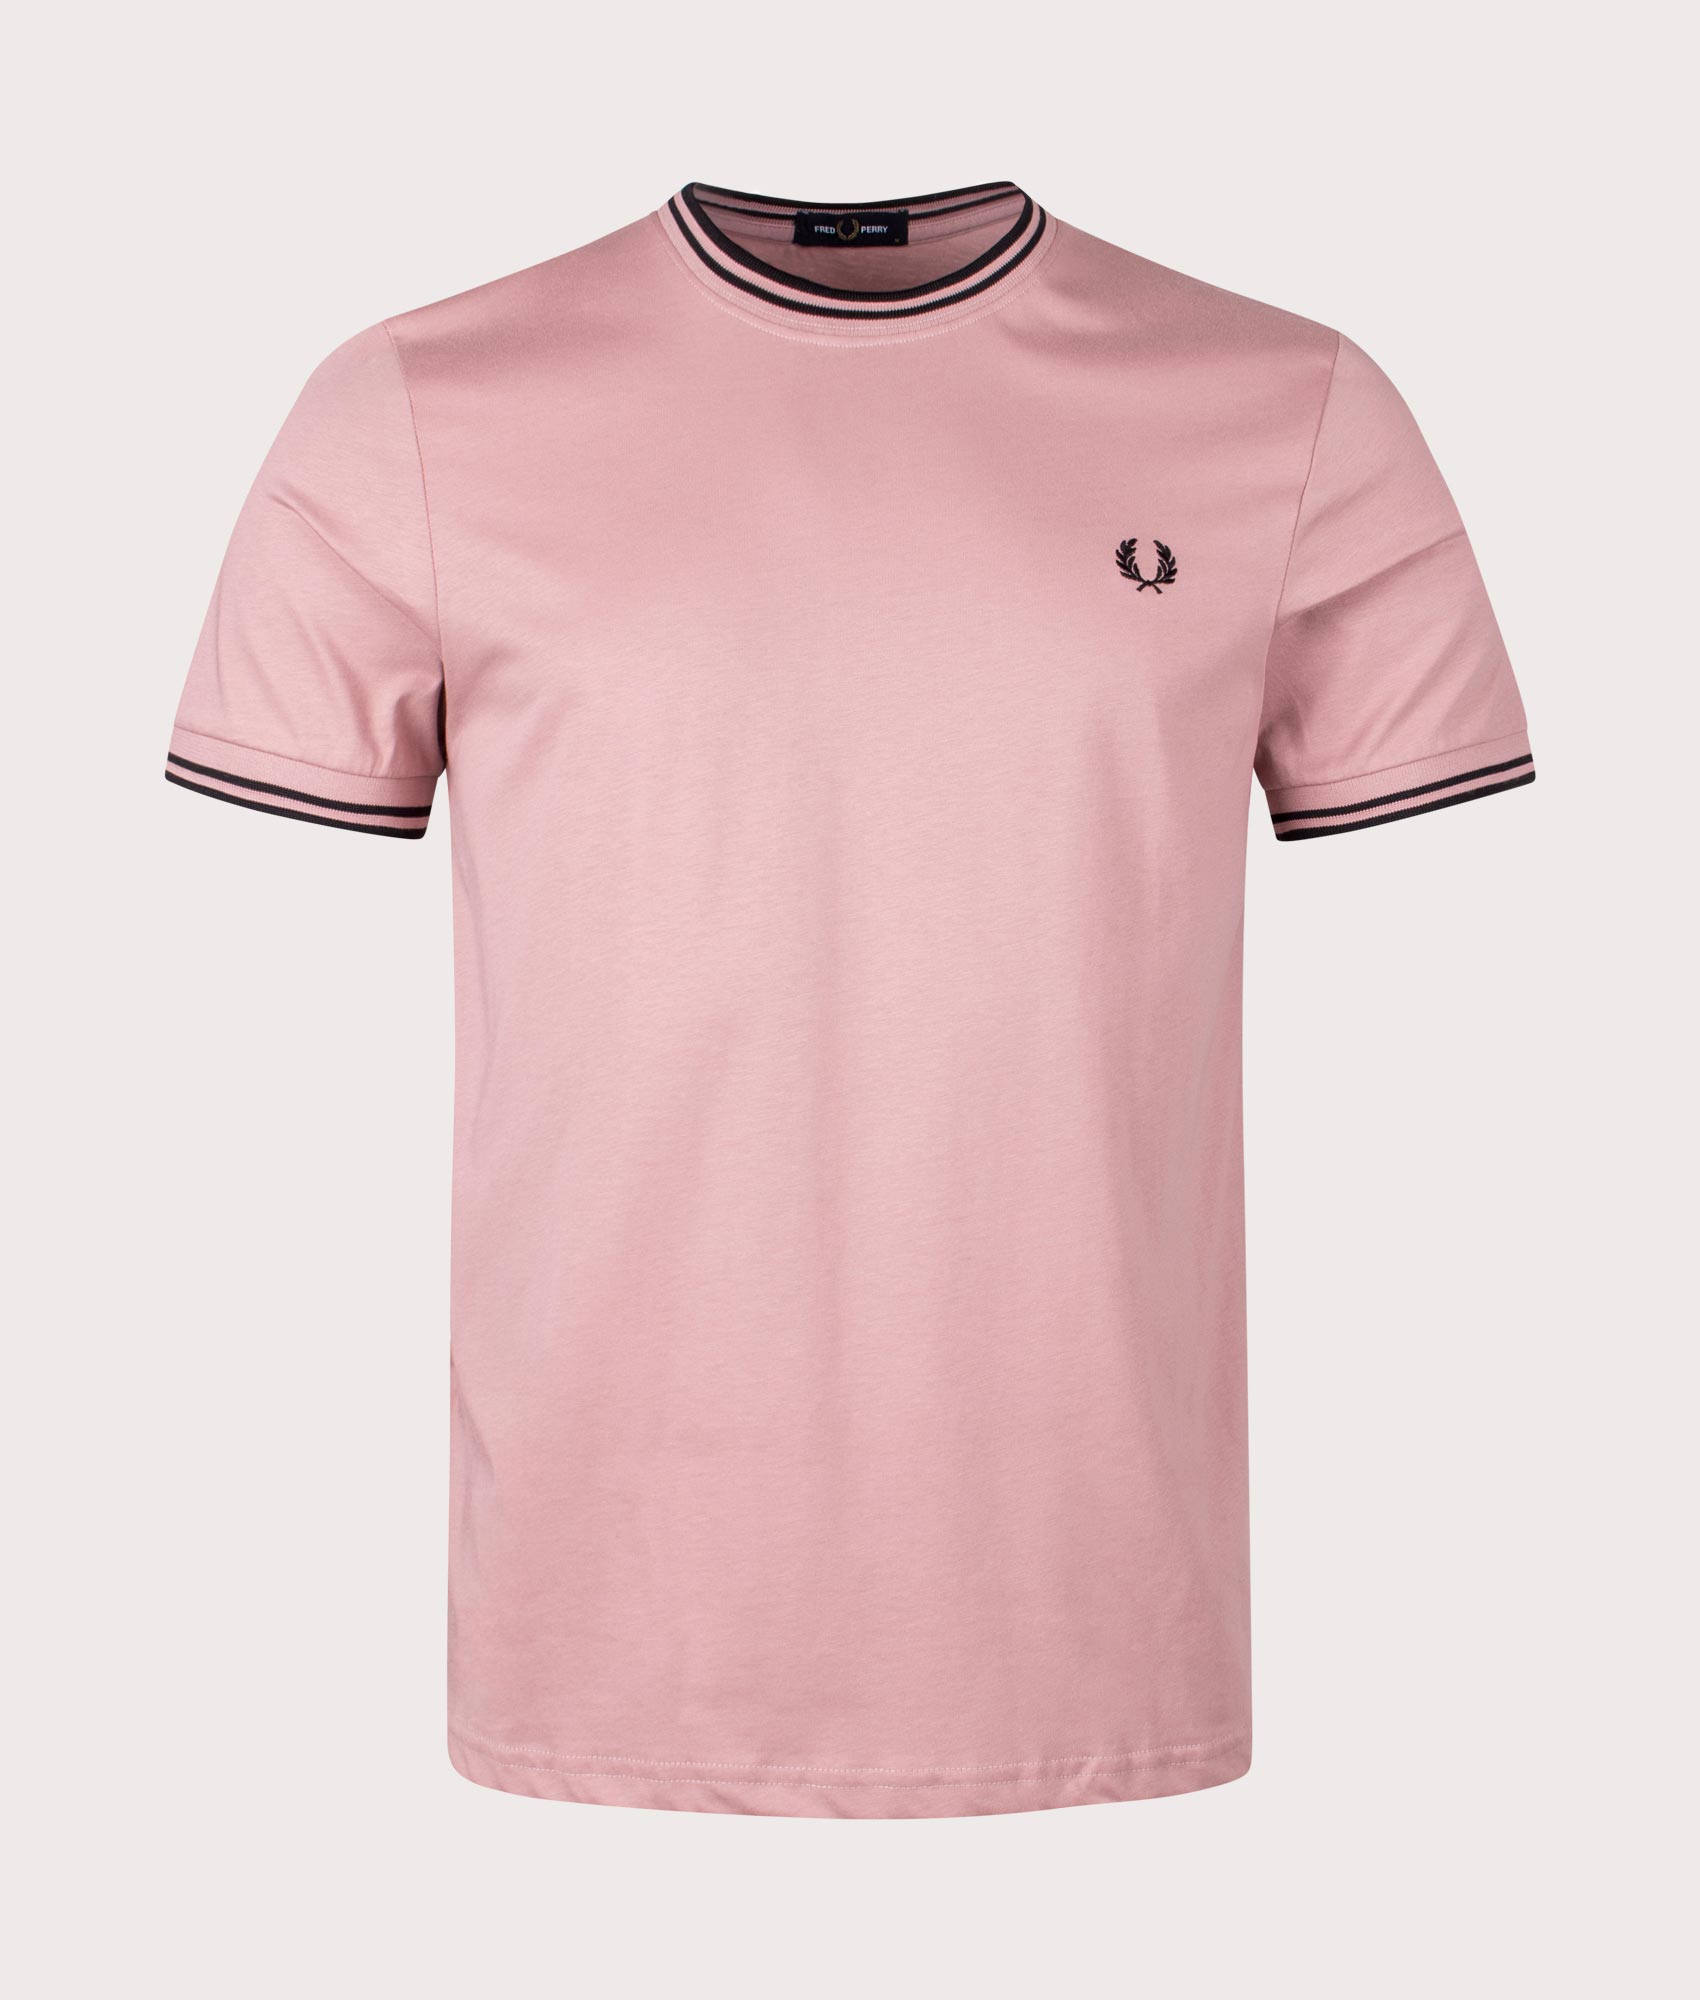 Fred Perry Mens Twin Tipped T-Shirt - Colour: T89 Dusty Rose Pink/Black - Size: Medium